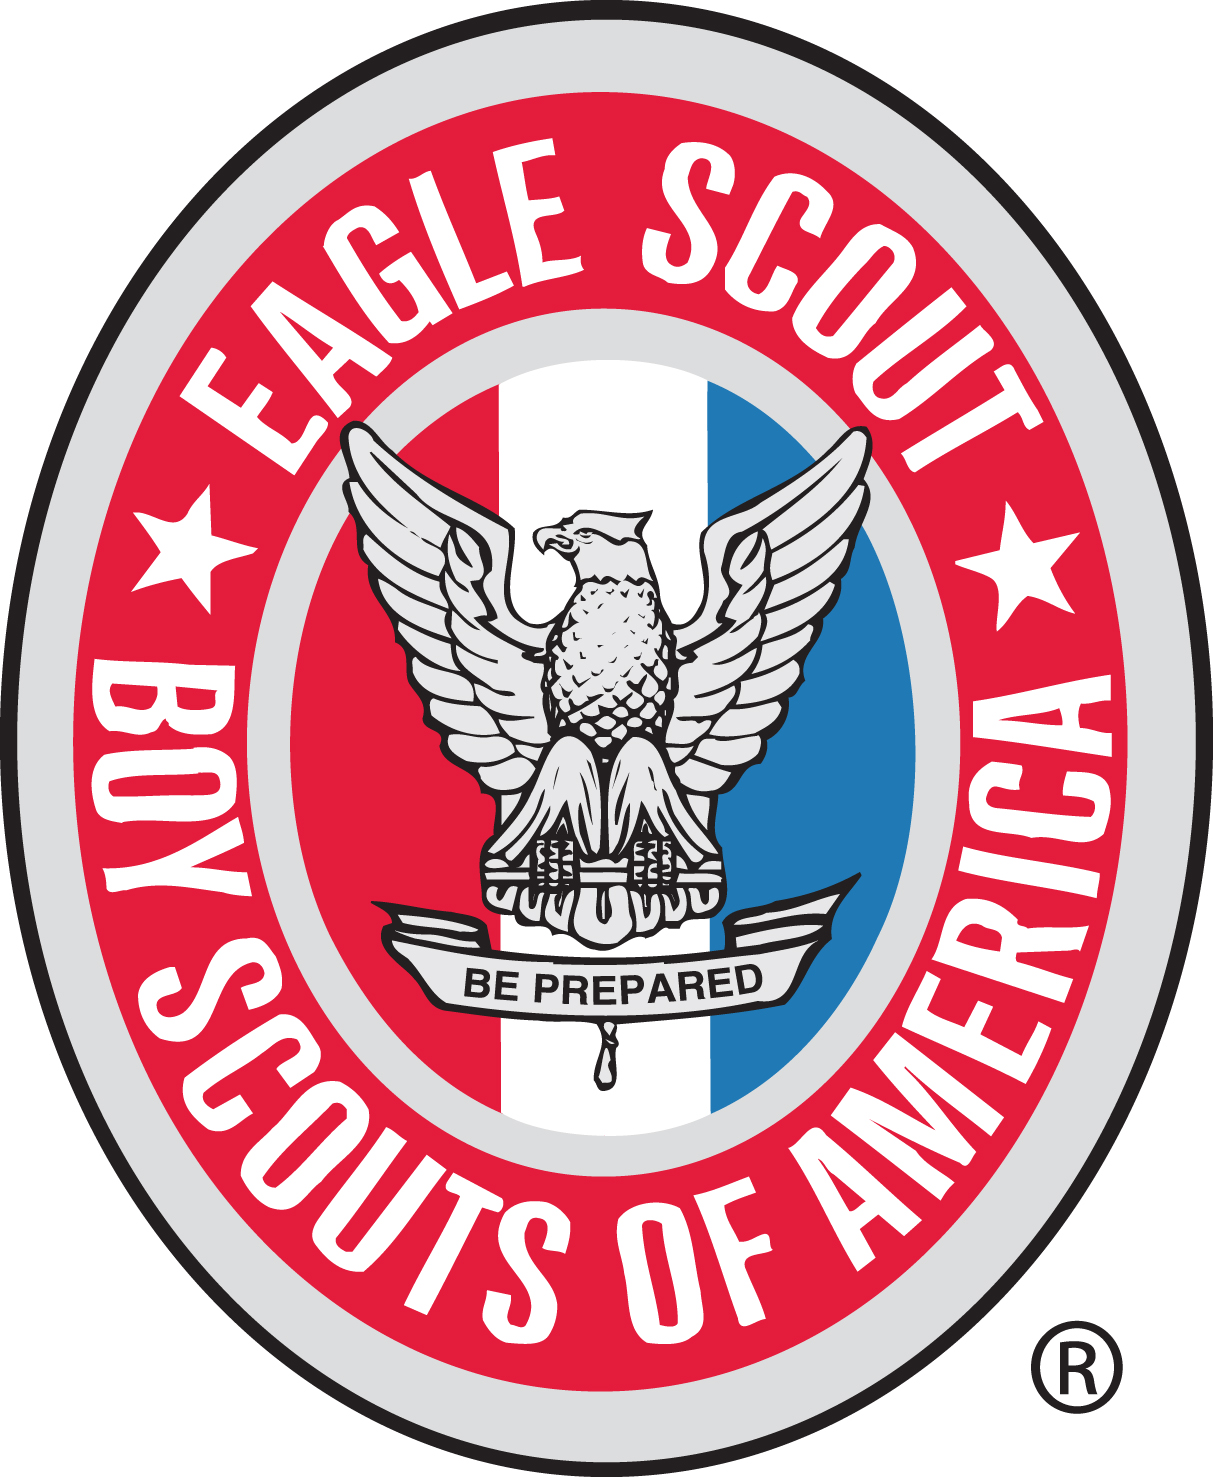 ... Clipart; Large Eagle Scout Badge and Medal Image for Presentations; Badges, Eagles and Dylan Ou0026#39;Brien ...